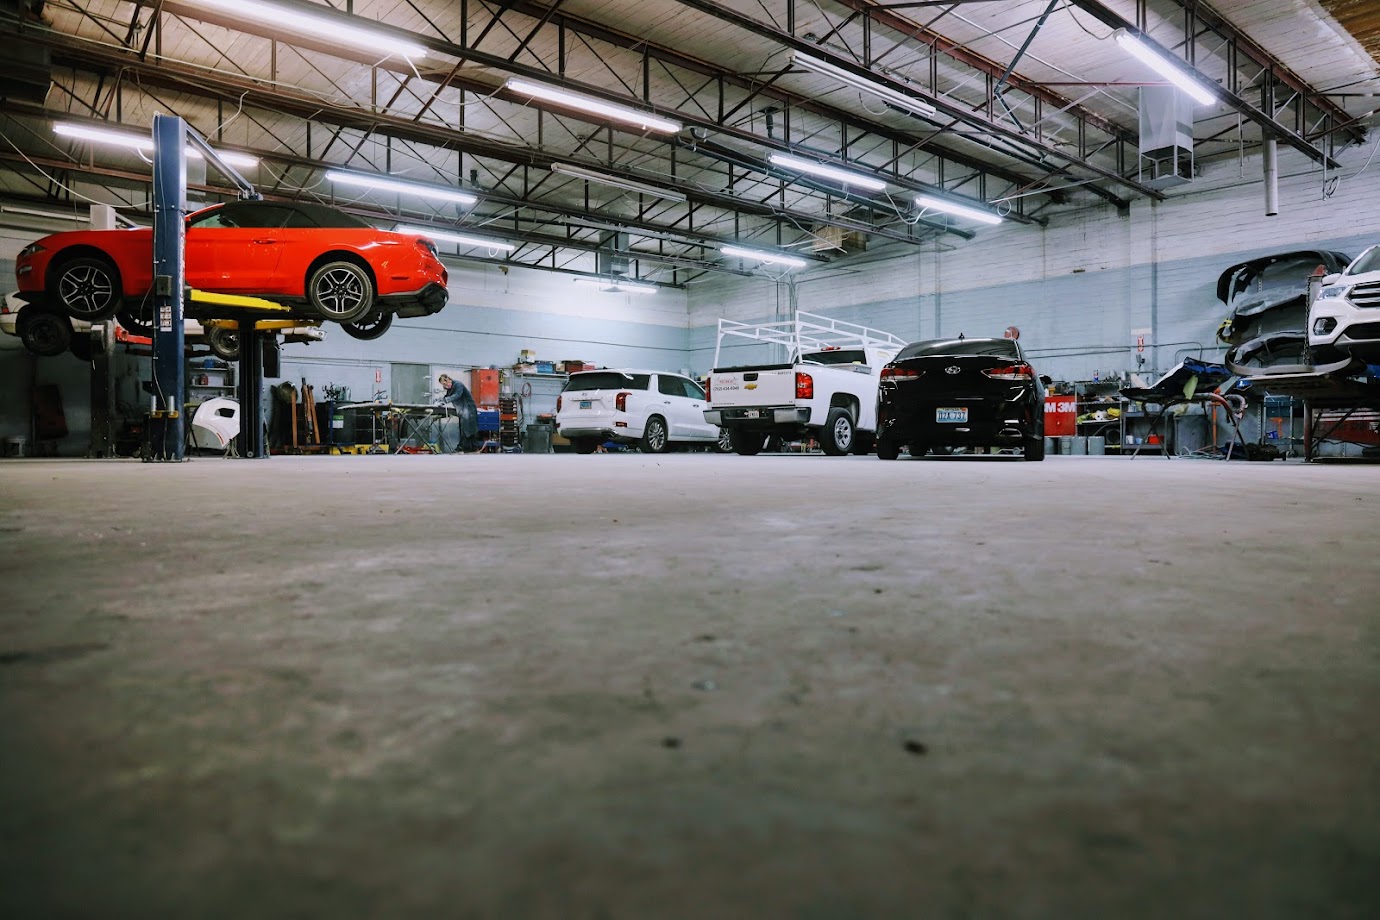 Wreck Center Auto Body Paint and Collision Repair